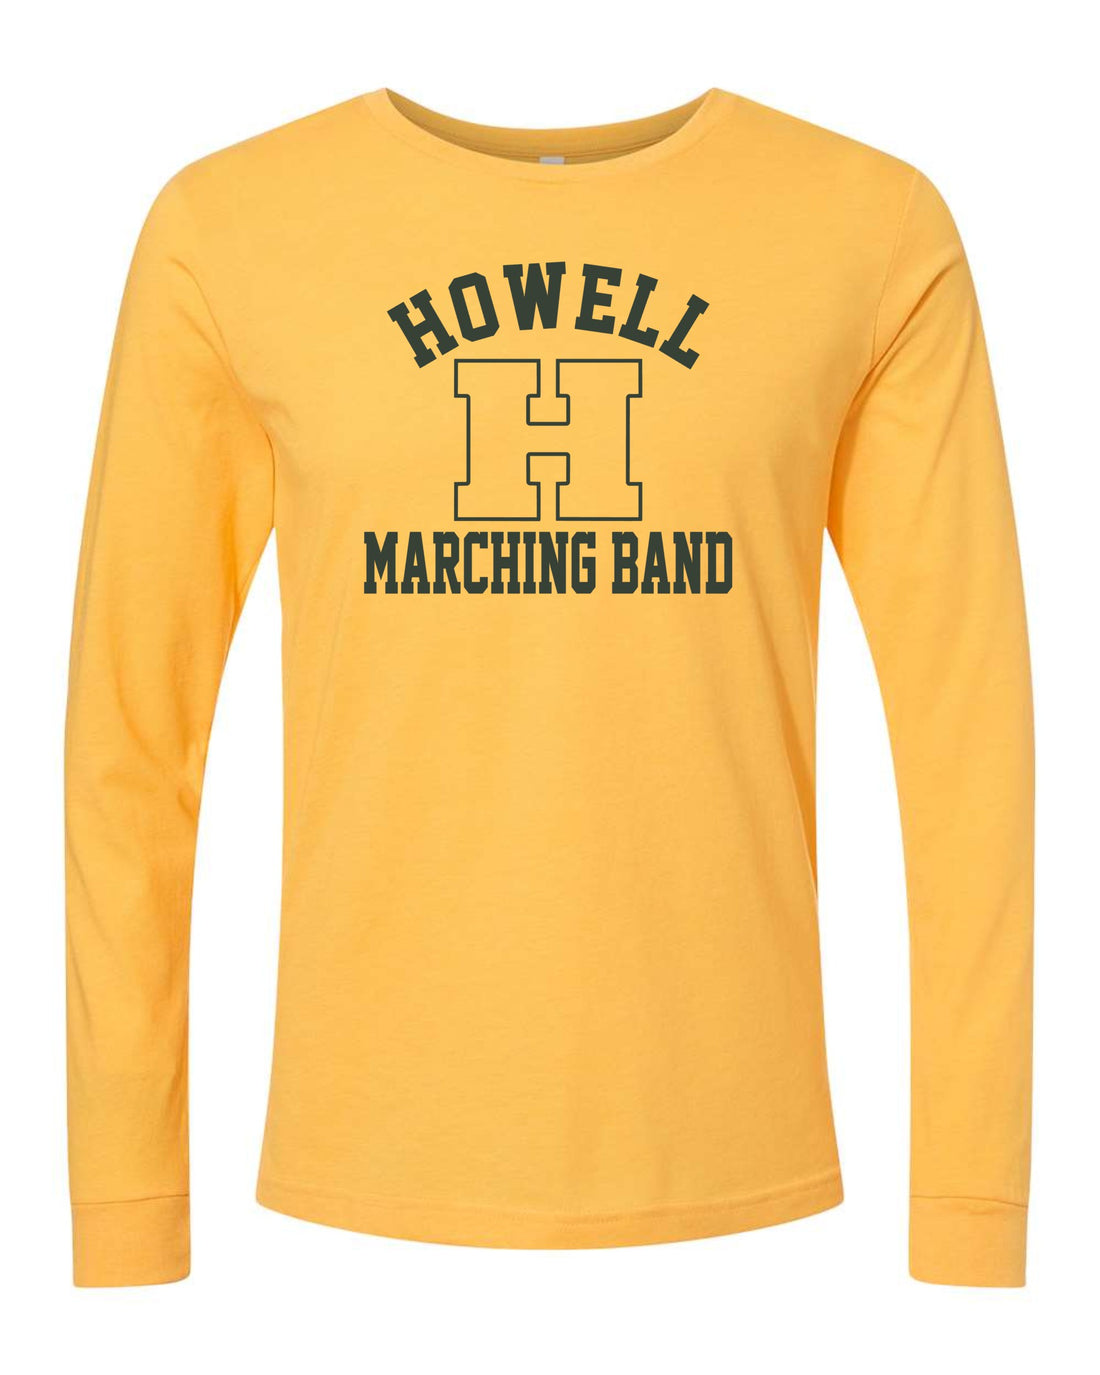 Howell Marching Band Premium Long Sleeve Tee